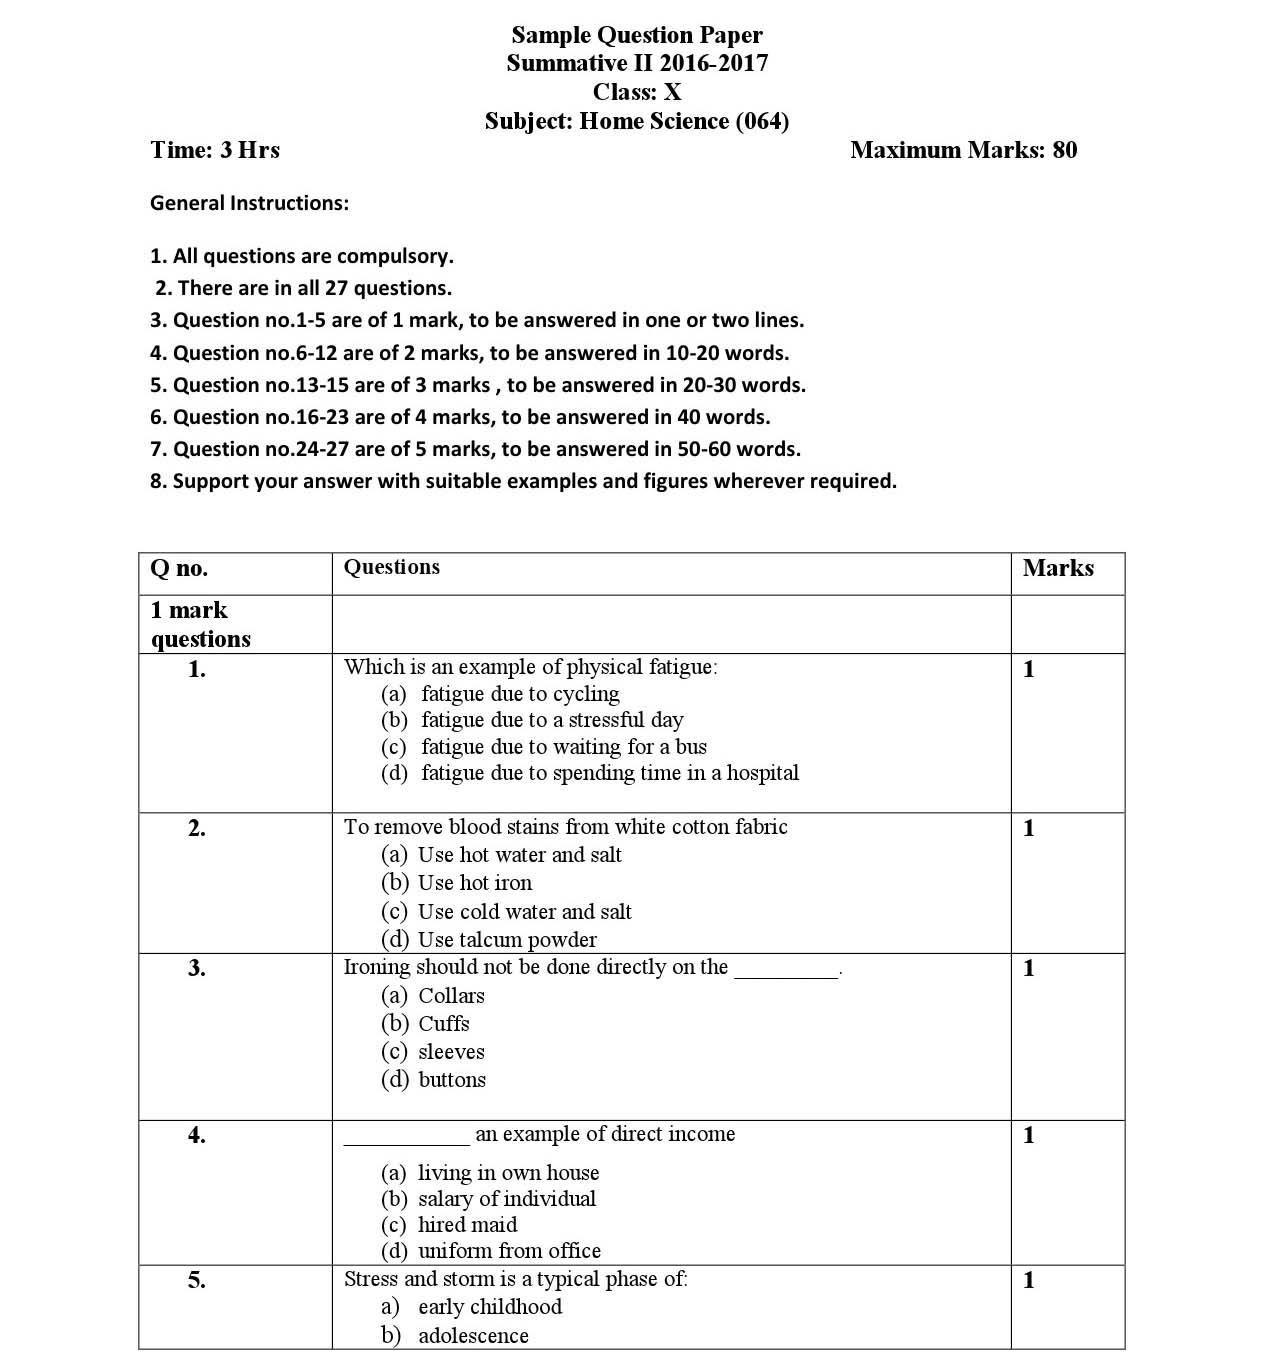 Home Science CBSE Class X Sample Question Paper 2016 17 - Image 1